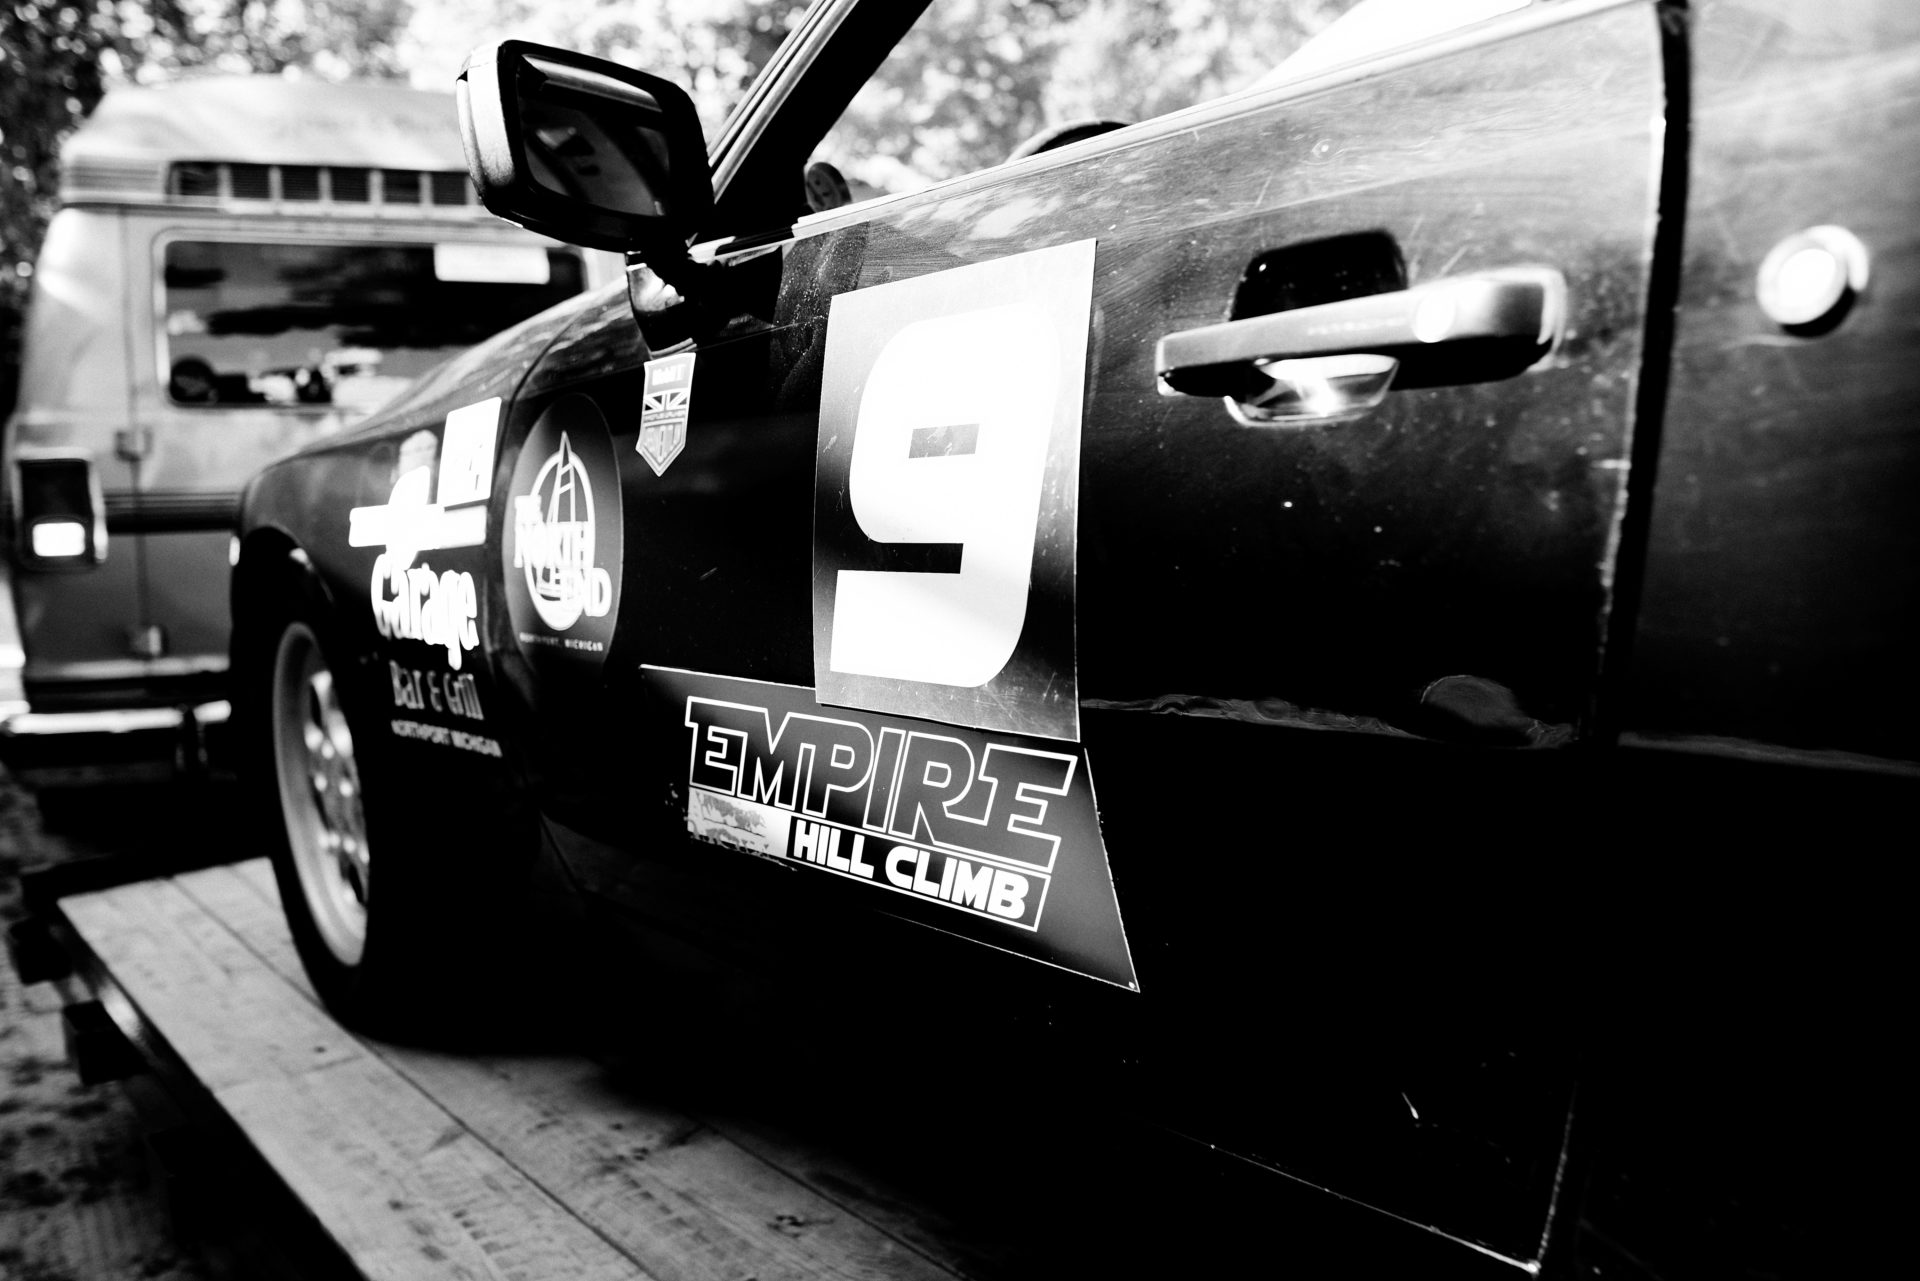 jahbliss productions towing porsche 944 to the empire hill climb at empire Michigan